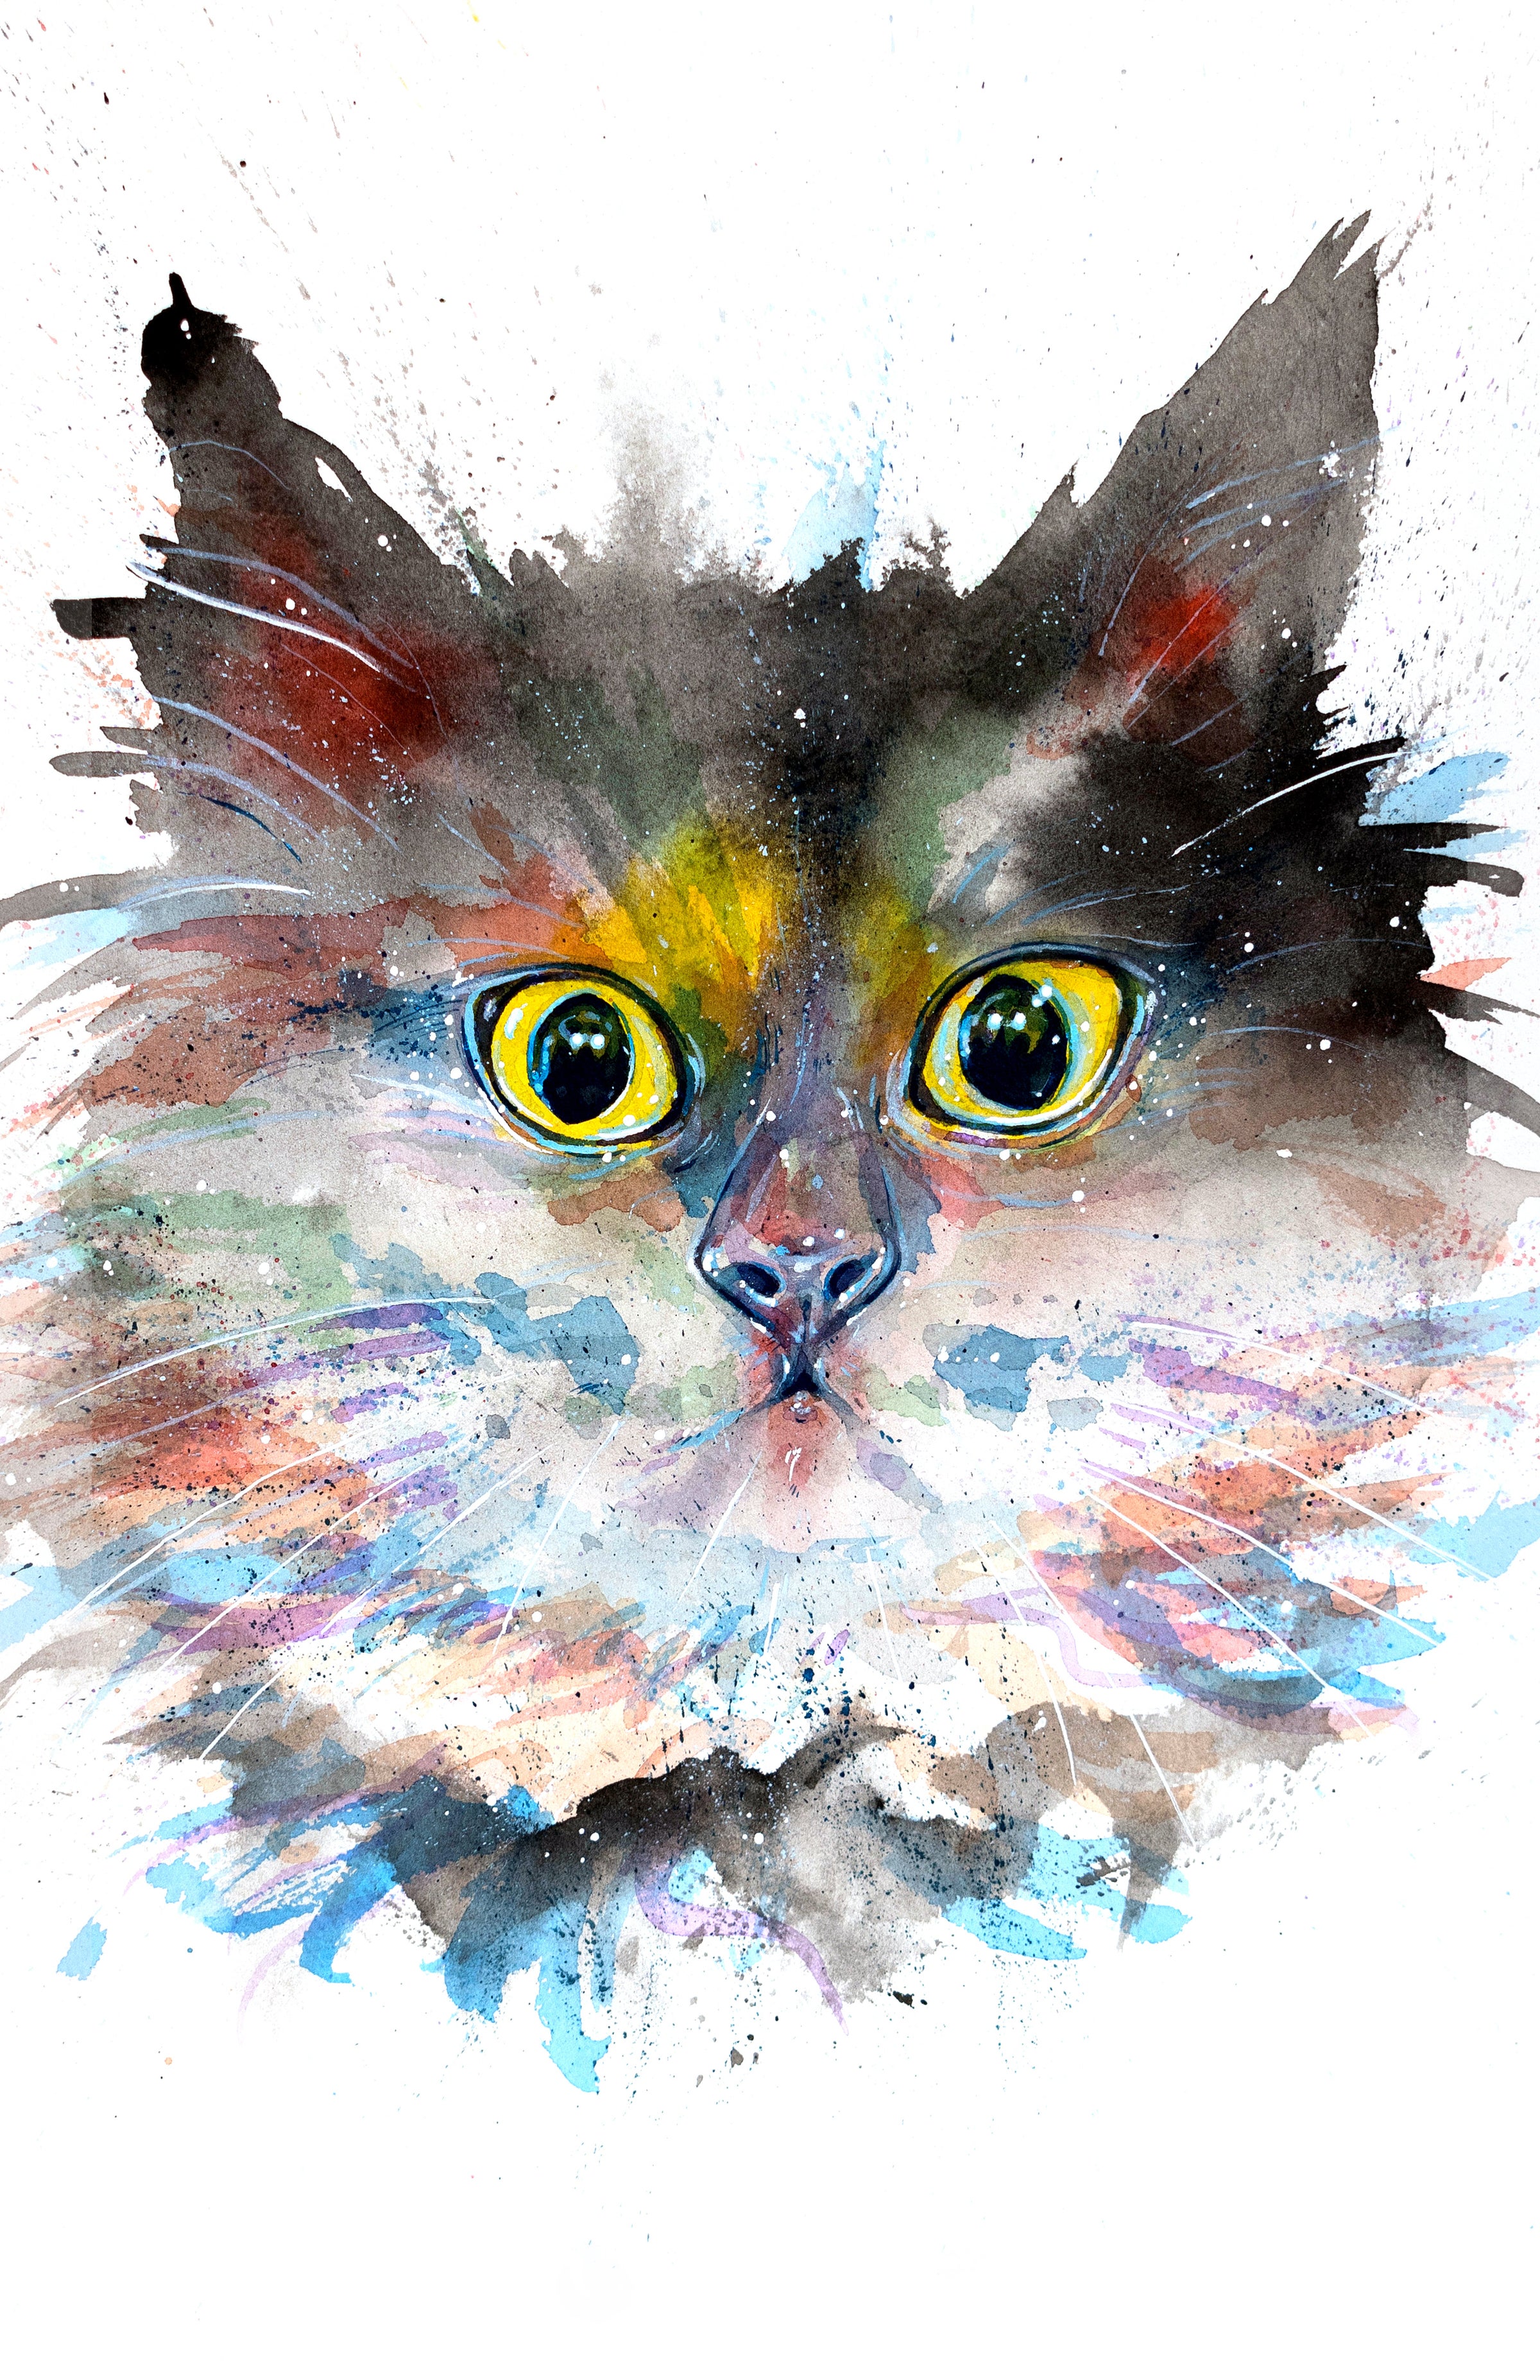 Angry cat : r/Watercolor